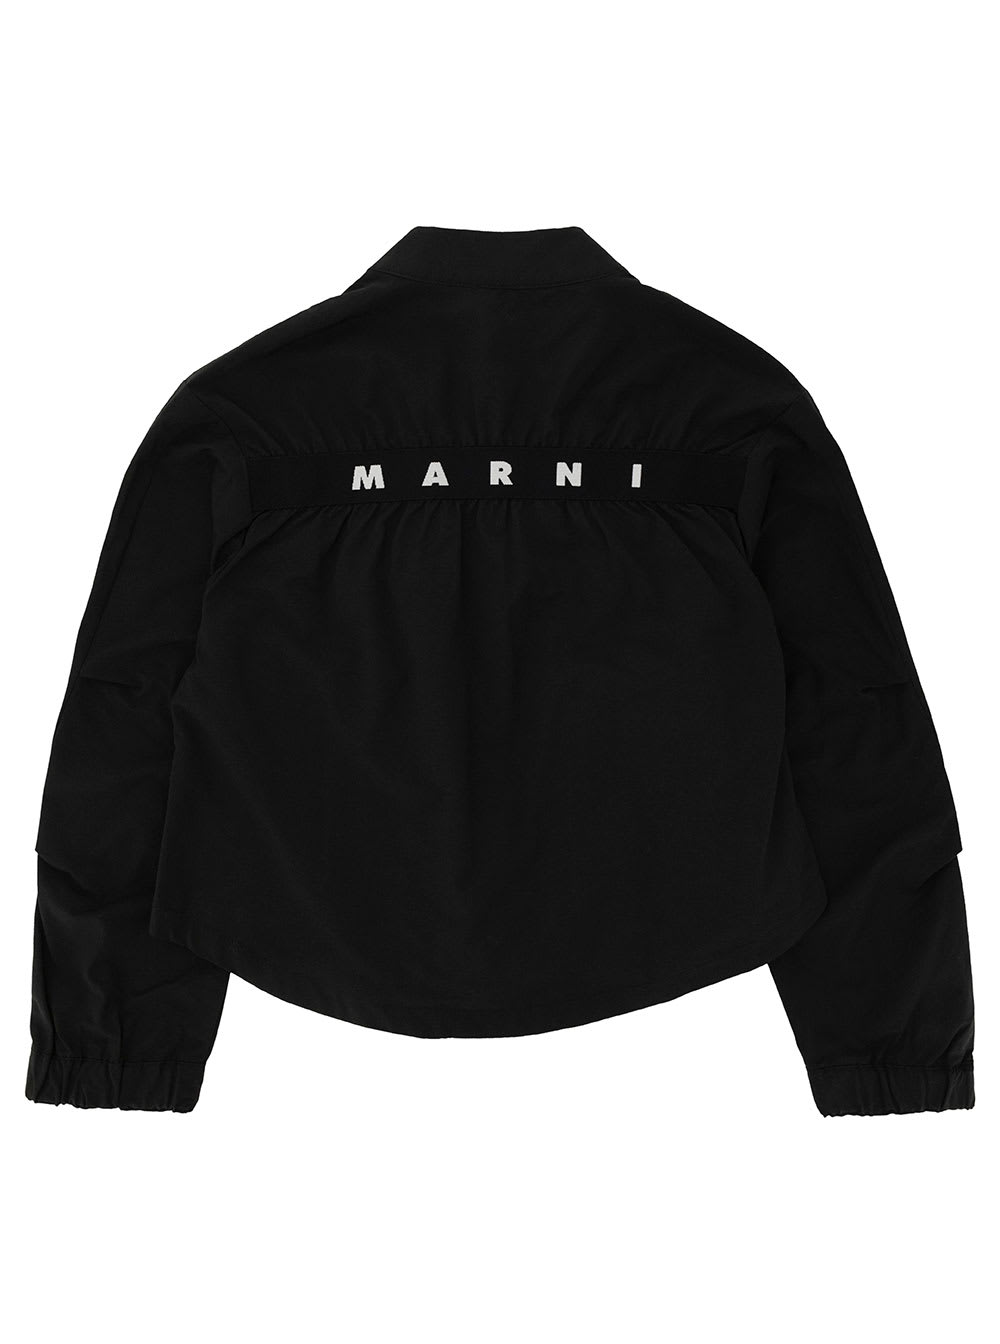 Shop Marni Black Jacket With Contrasting Logo At The Back In Cotton Blend Girl